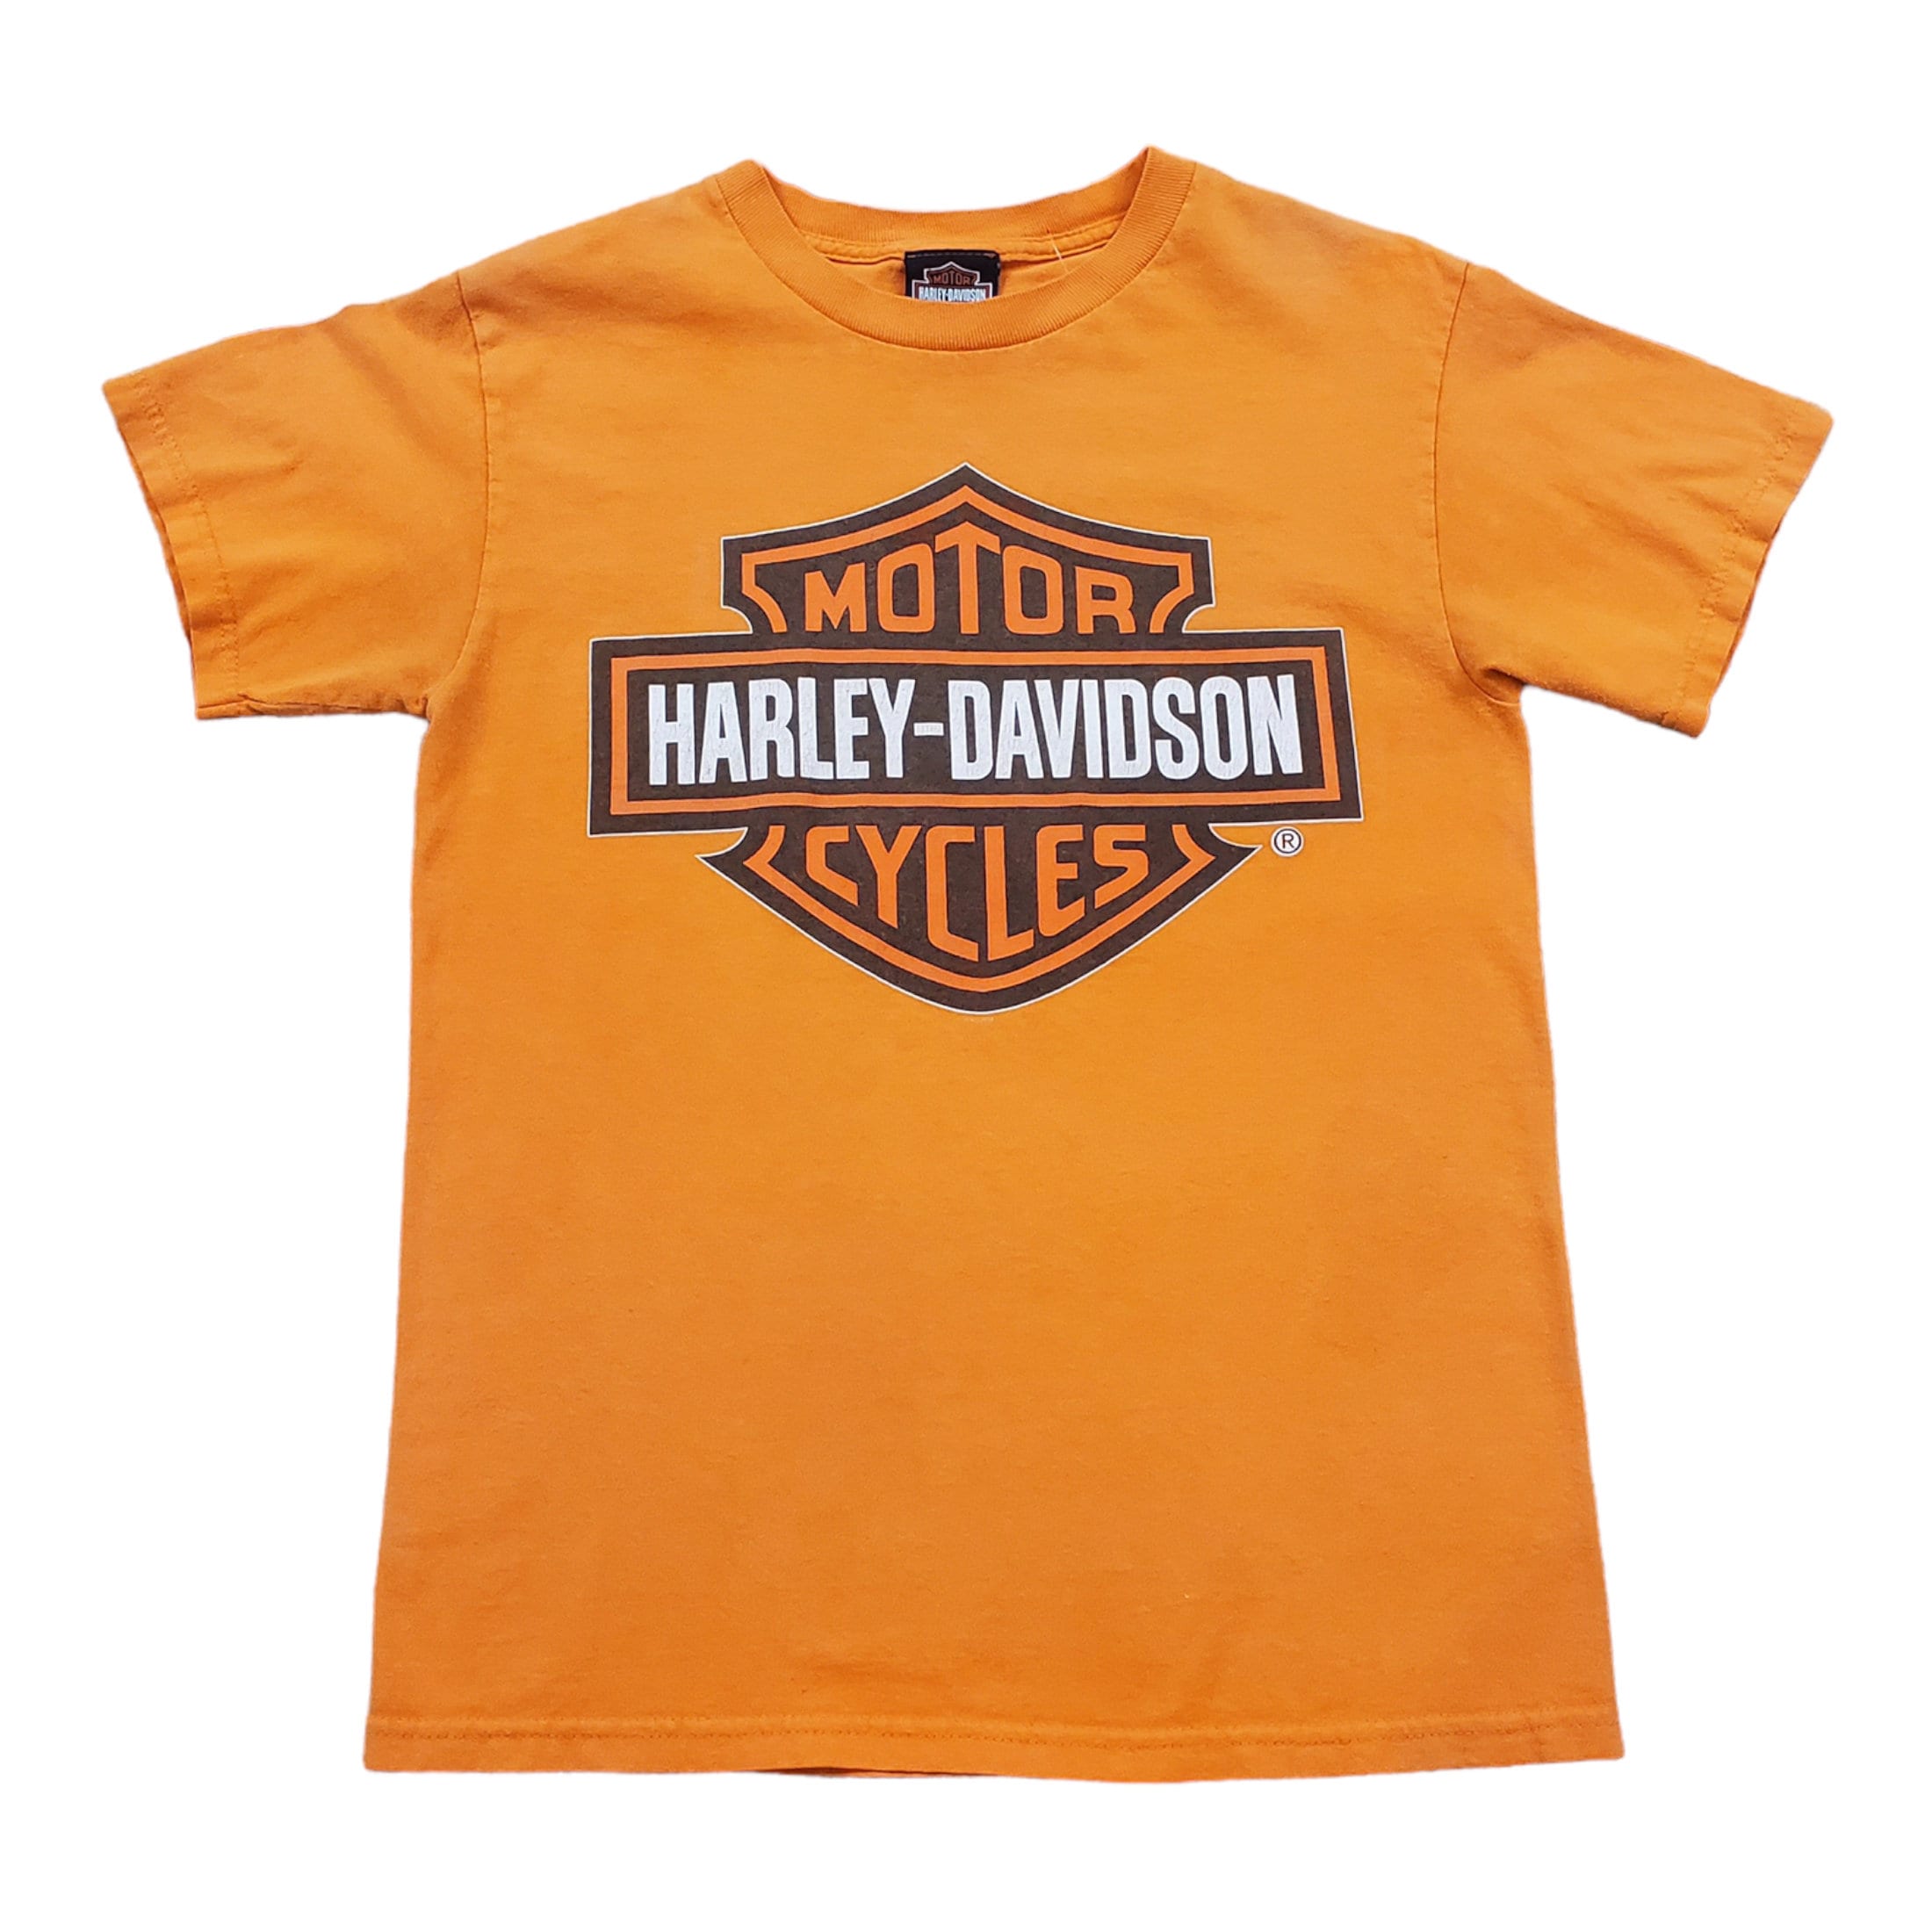 Harley T-shirts – People's Champ Vintage